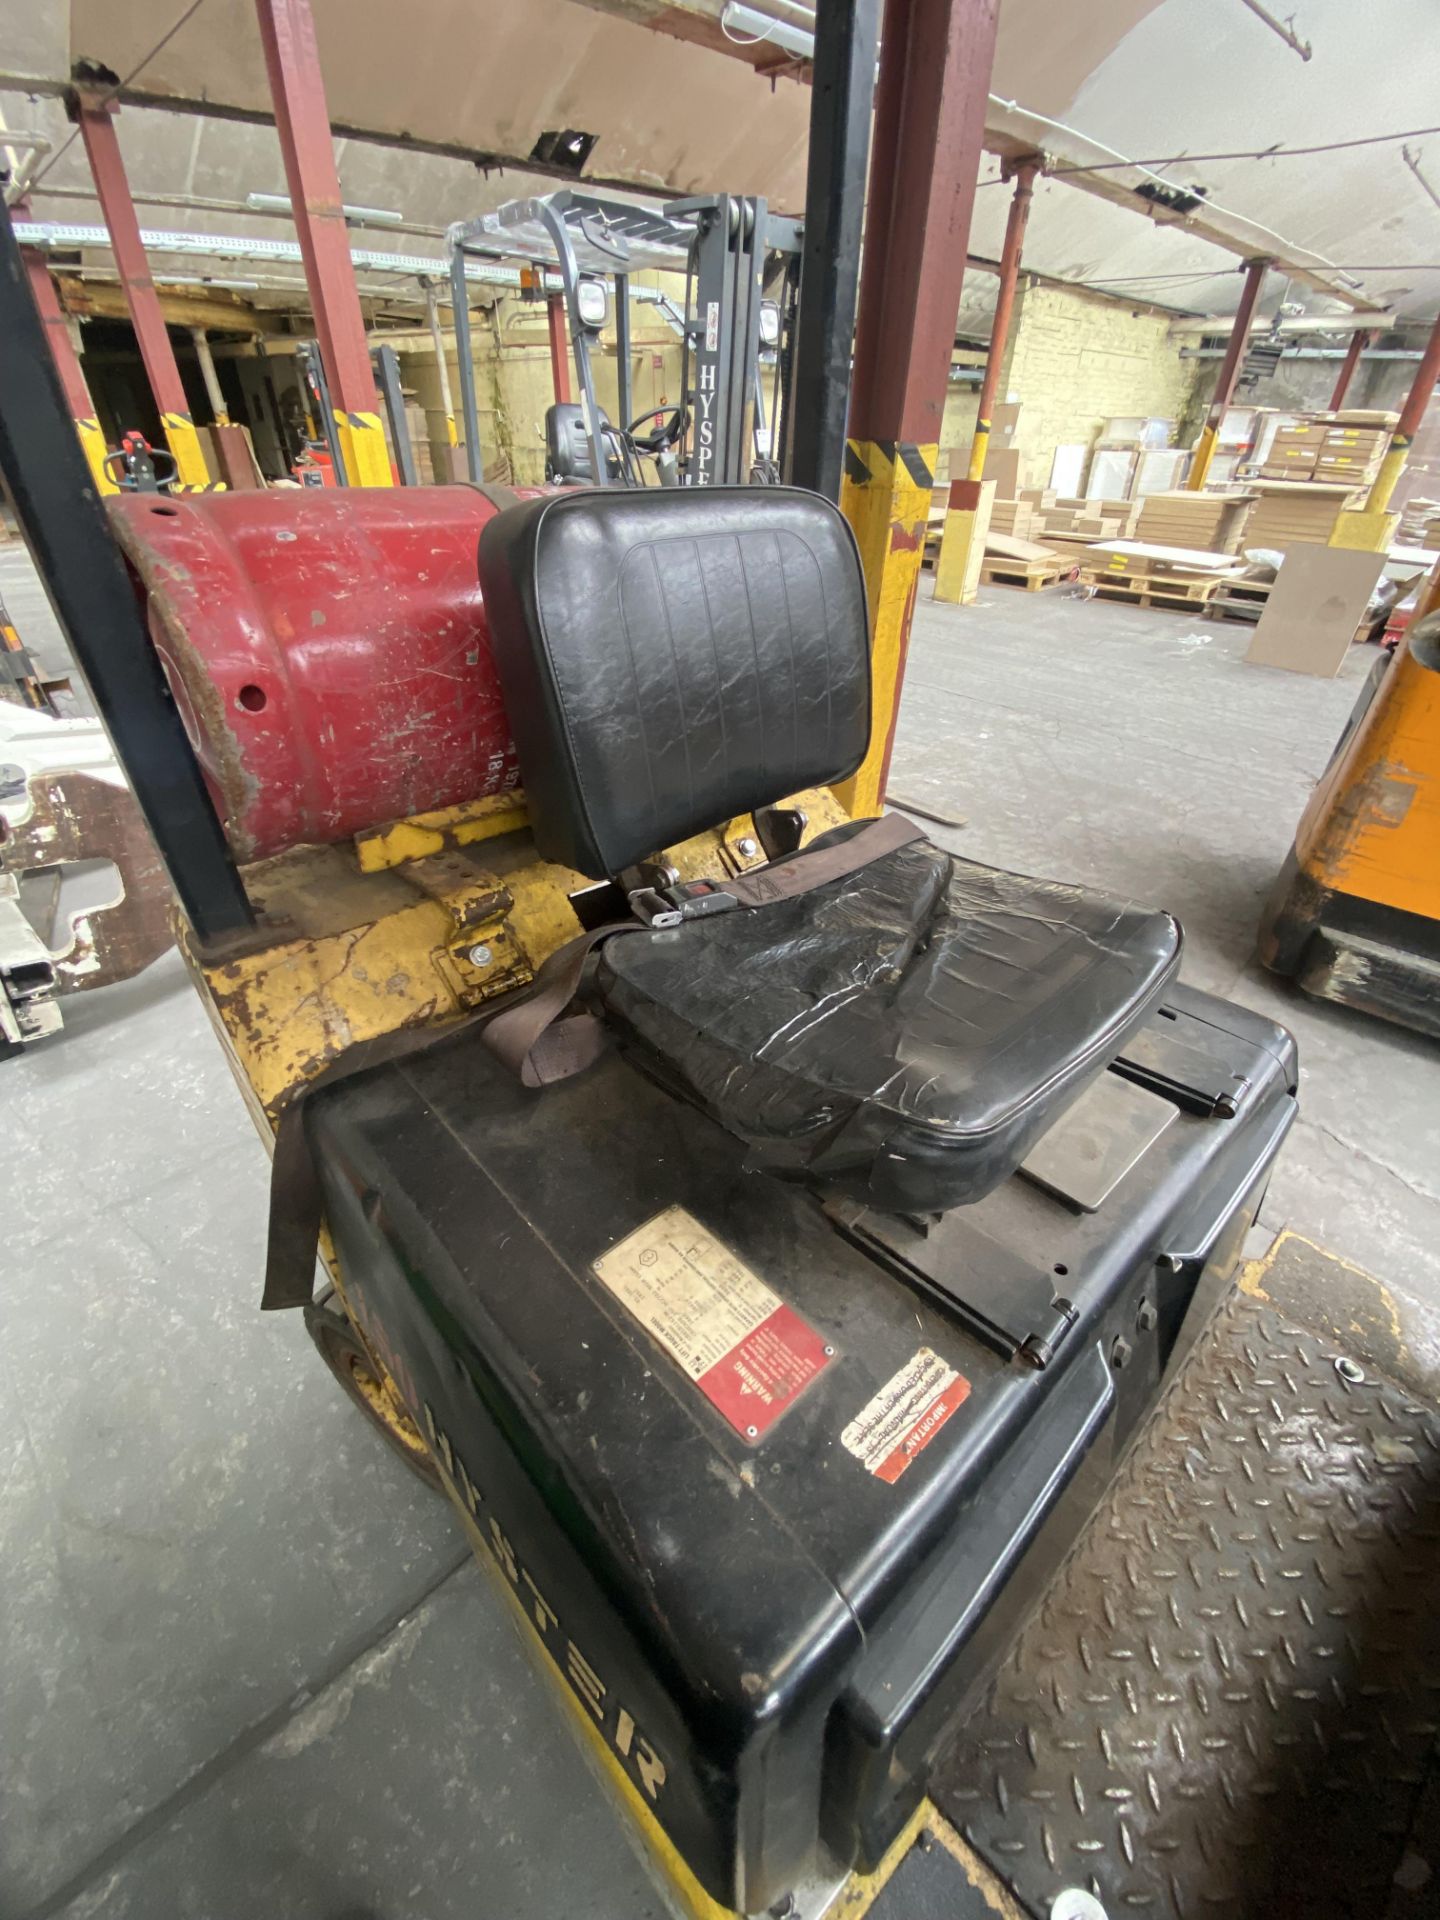 Hyster H1.50XL 1525kg cap. LPG Fork Lift Truck, serial no. C001B11623M, year of manufacture 1991, - Image 8 of 9